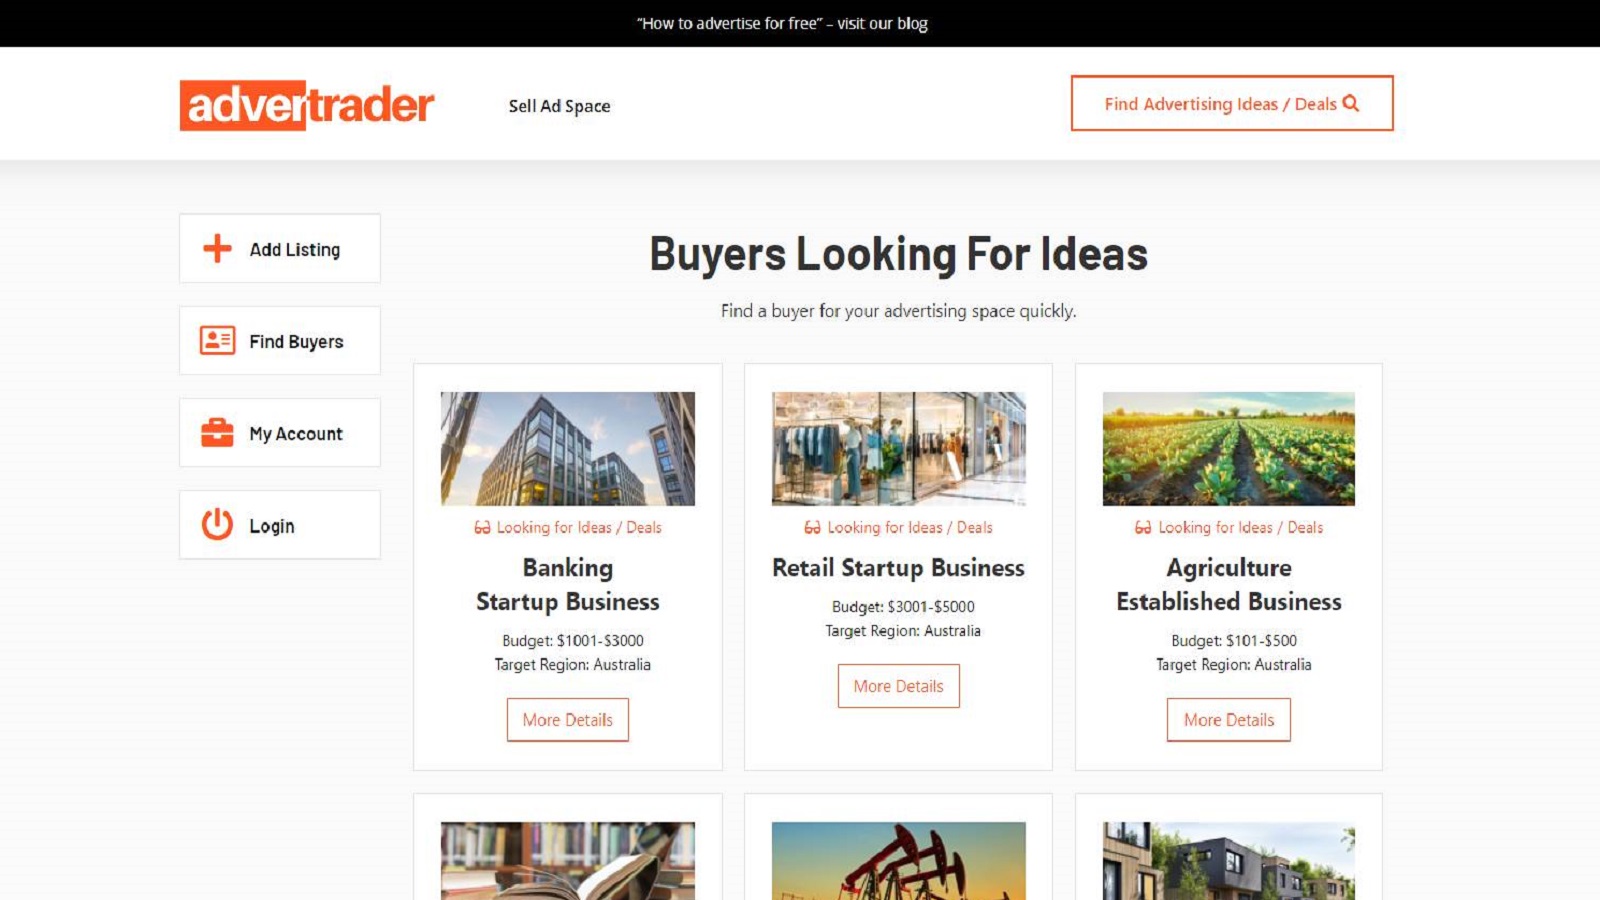 Find pricing, reviews and other details about Advertrader